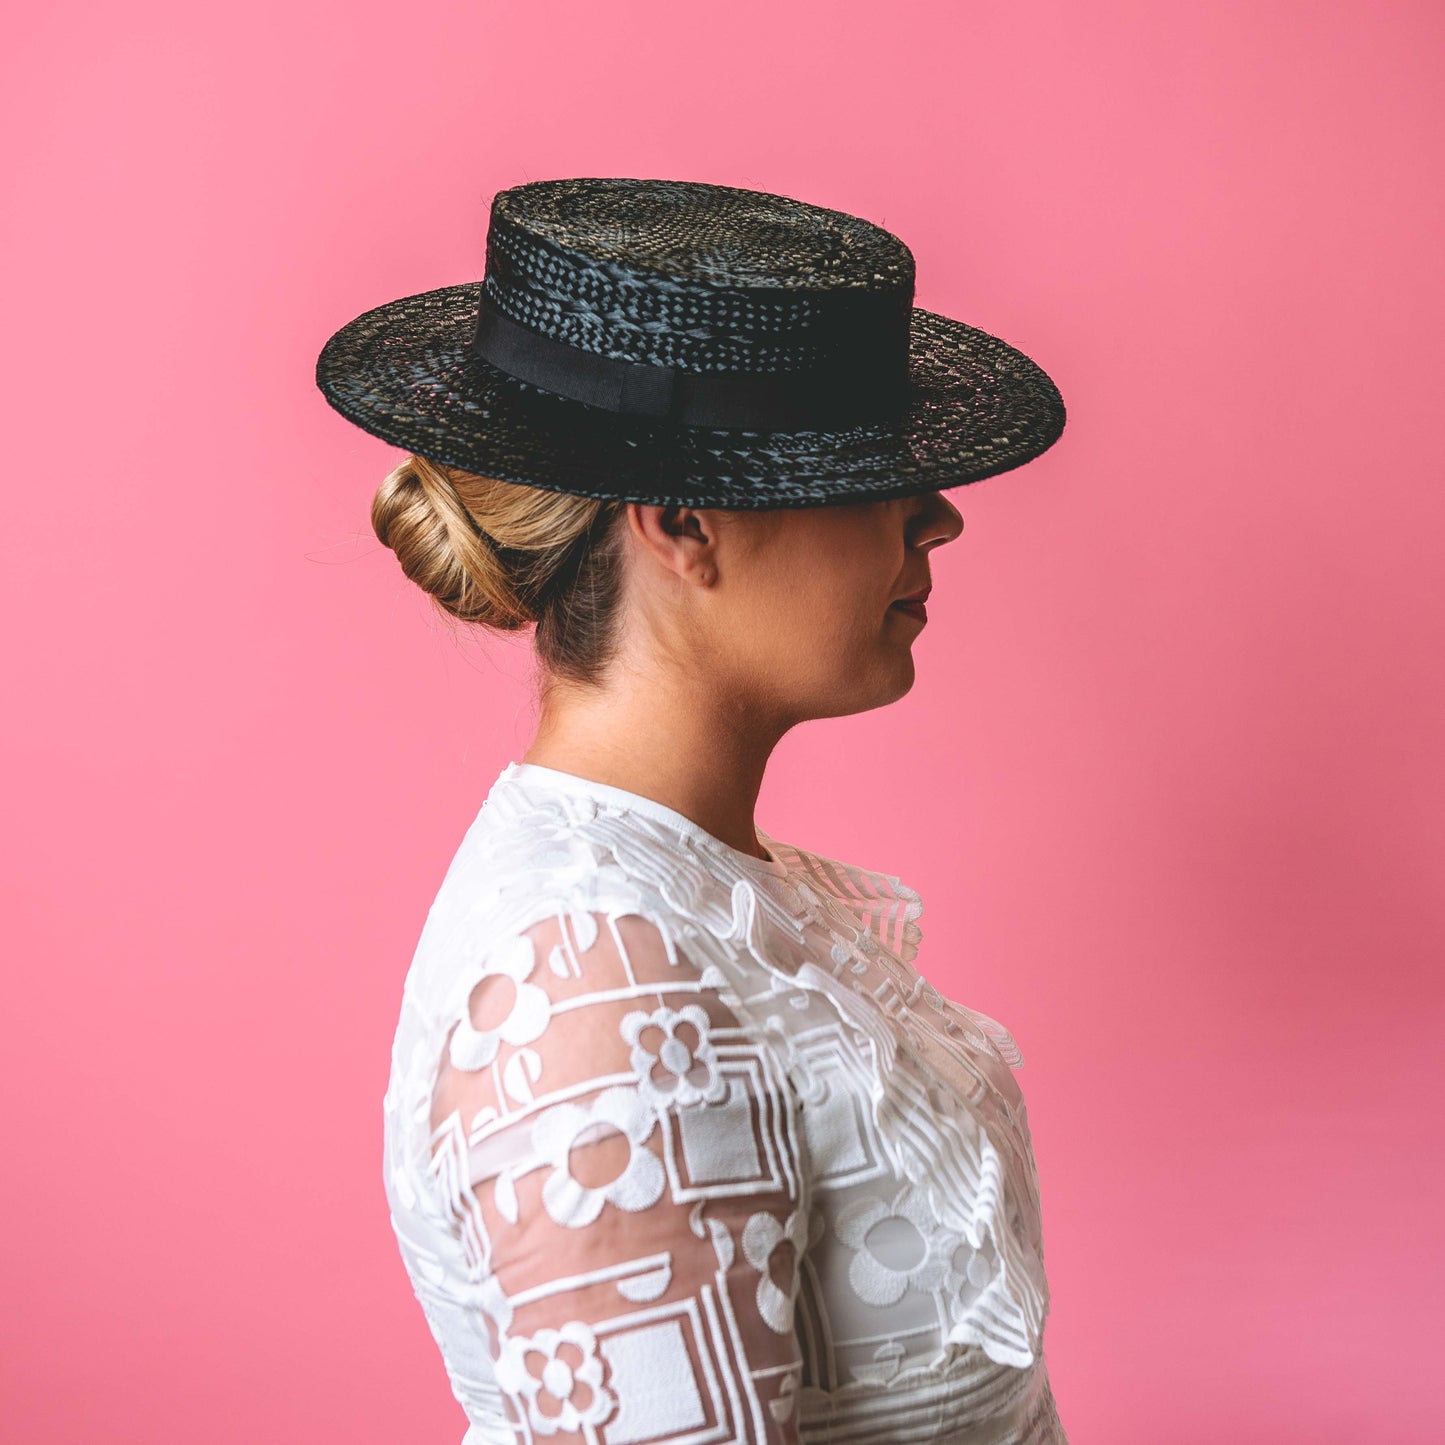 Claudia Straw Boater with textured black straw with petersham band